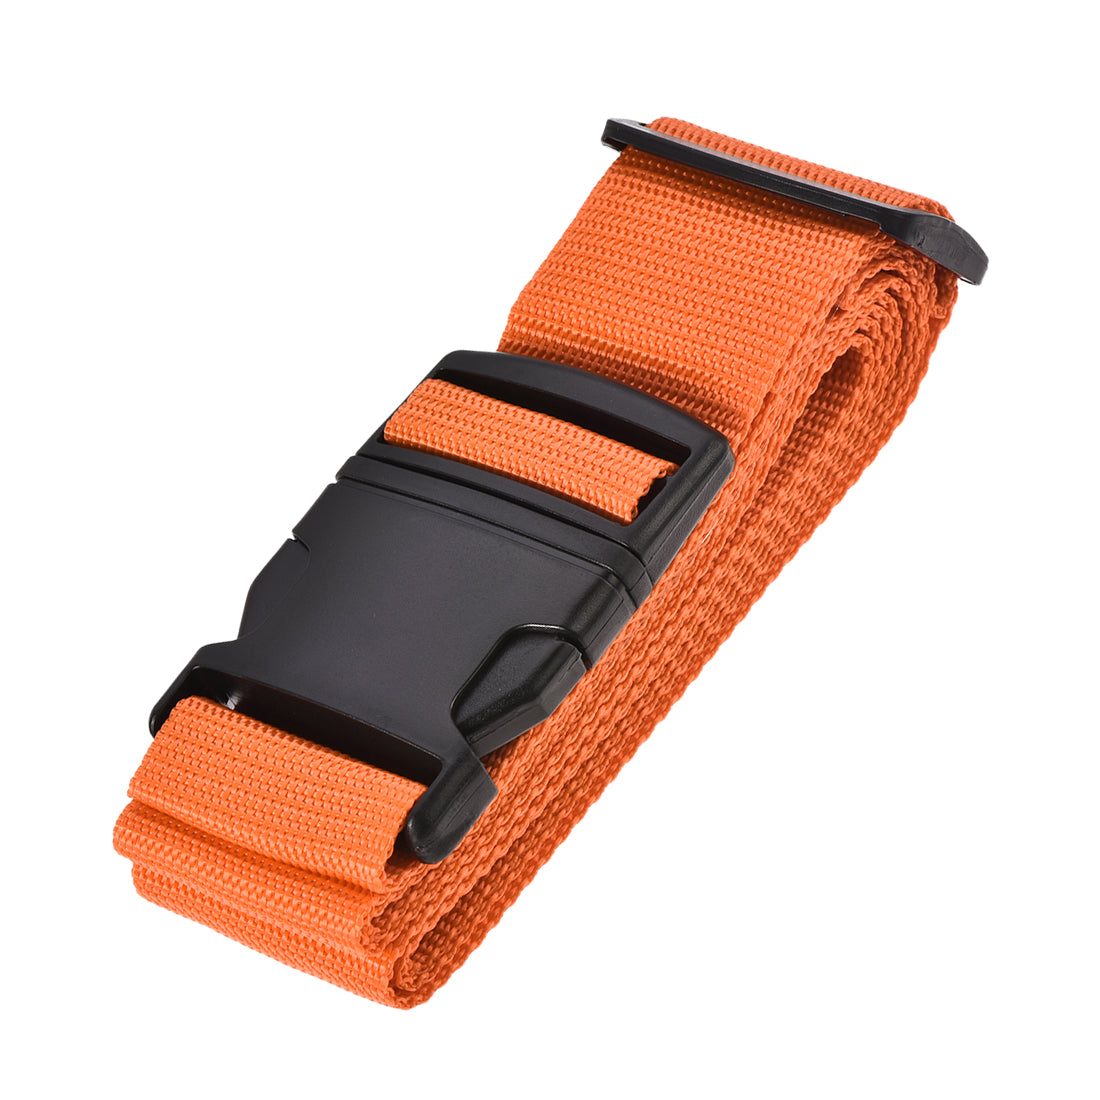 uxcell Uxcell Luggage Strap Suitcase Belt with Buckle Label, 2Mx5cm Adjustable PP Travel Bag Packing Accessory, Orange